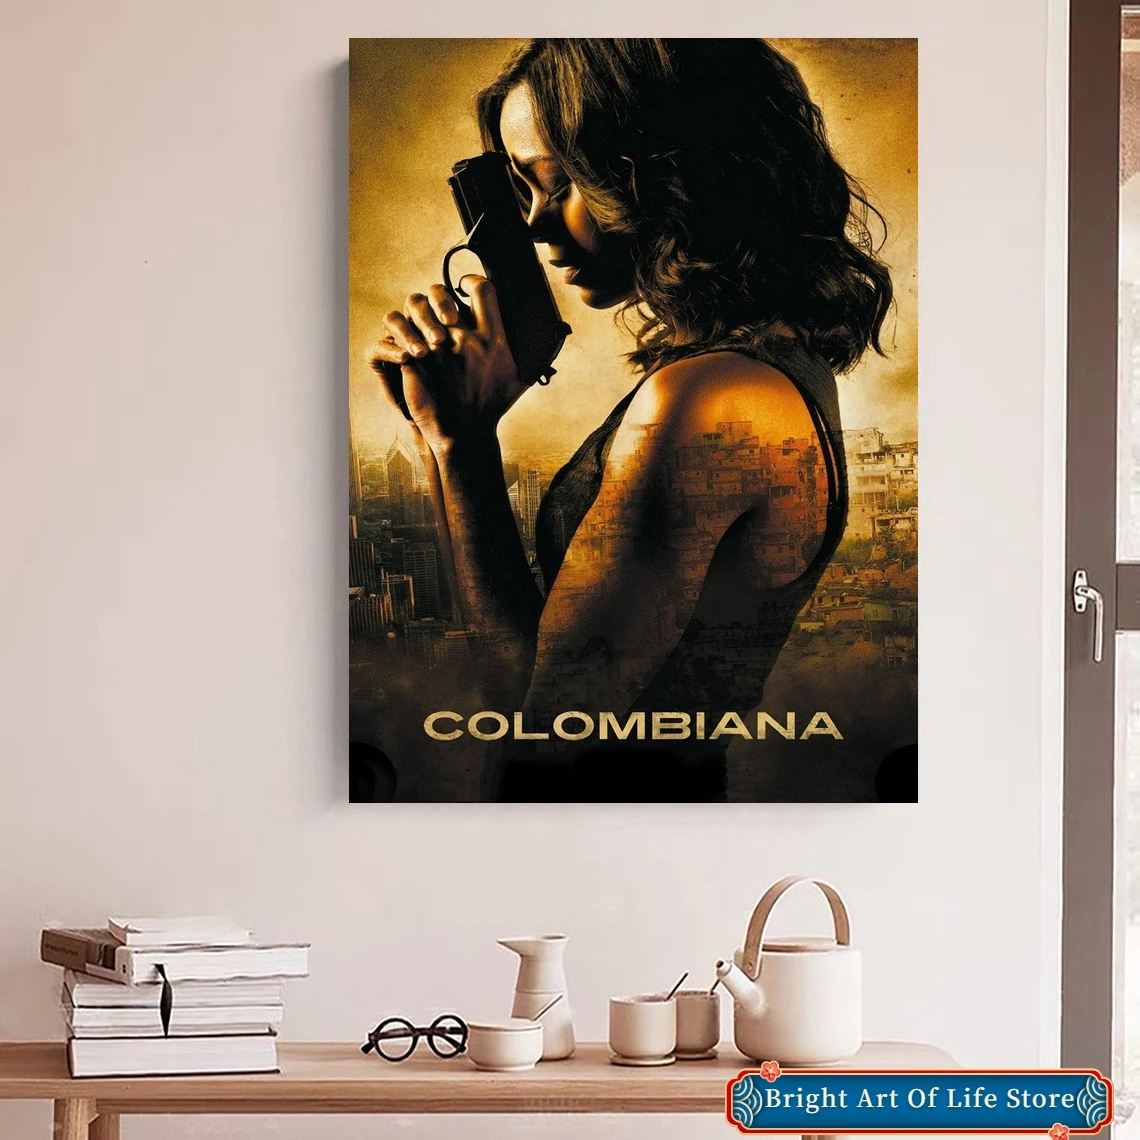 

Colombiana (2011) Movie Poster Art Cover Star Photo Print Apartment Home Decor Wall Painting (No Frame)